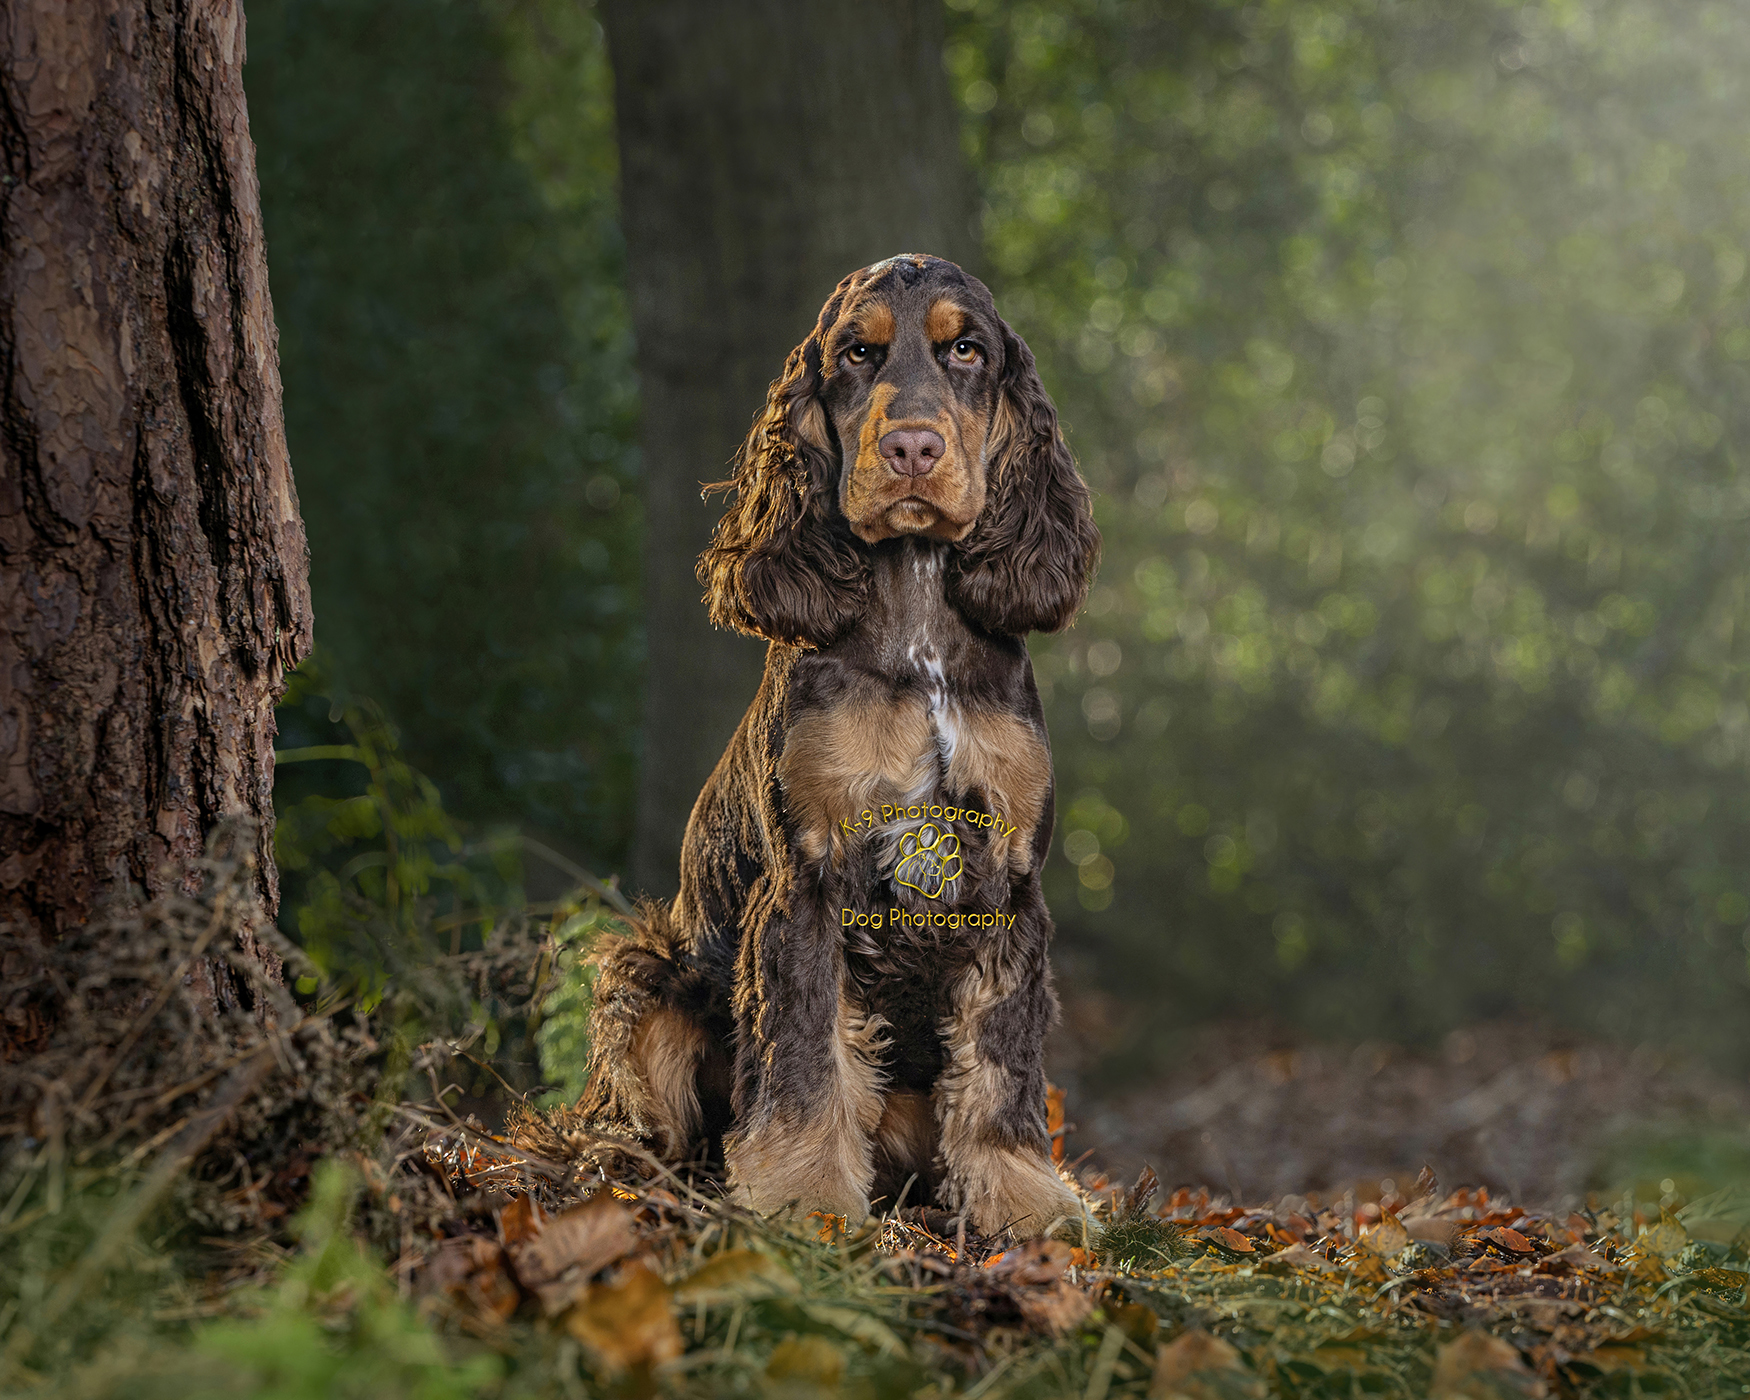 Spaniel dog taken by Dog Photographer Adrian Bullers in London England